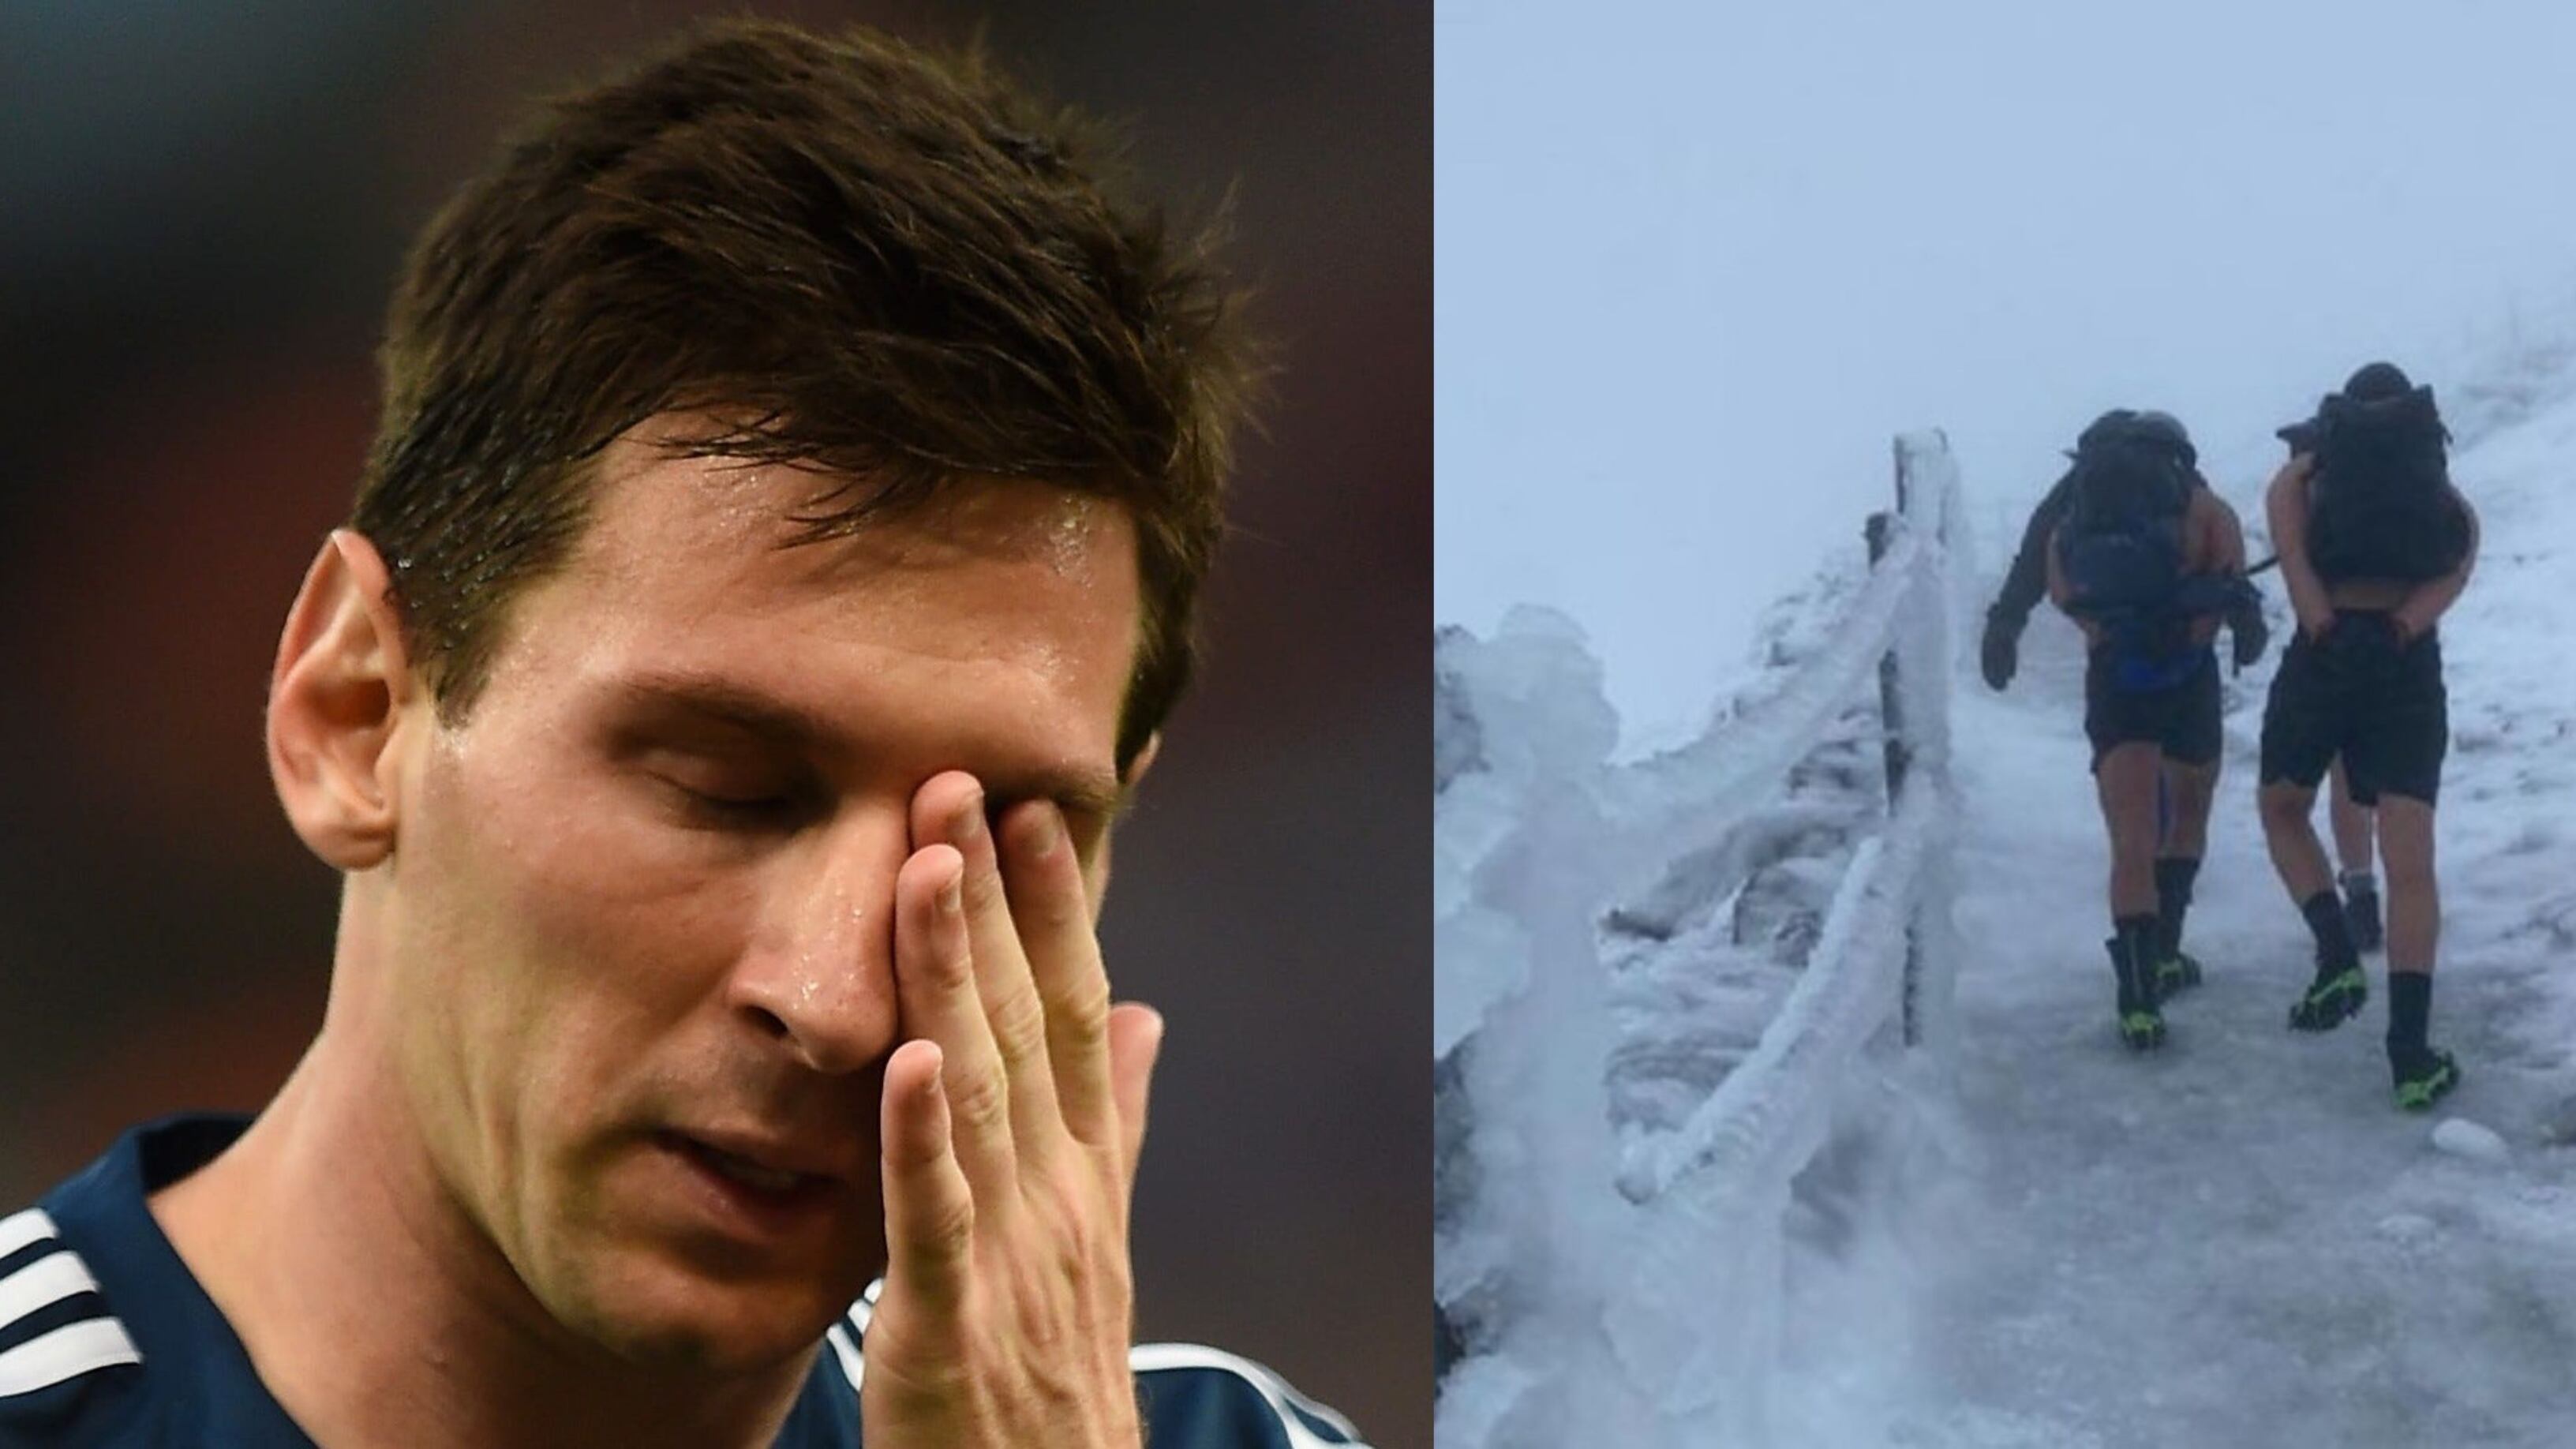 He made Messi cry at the World Cup, now he climbs dangerous mountains as a living